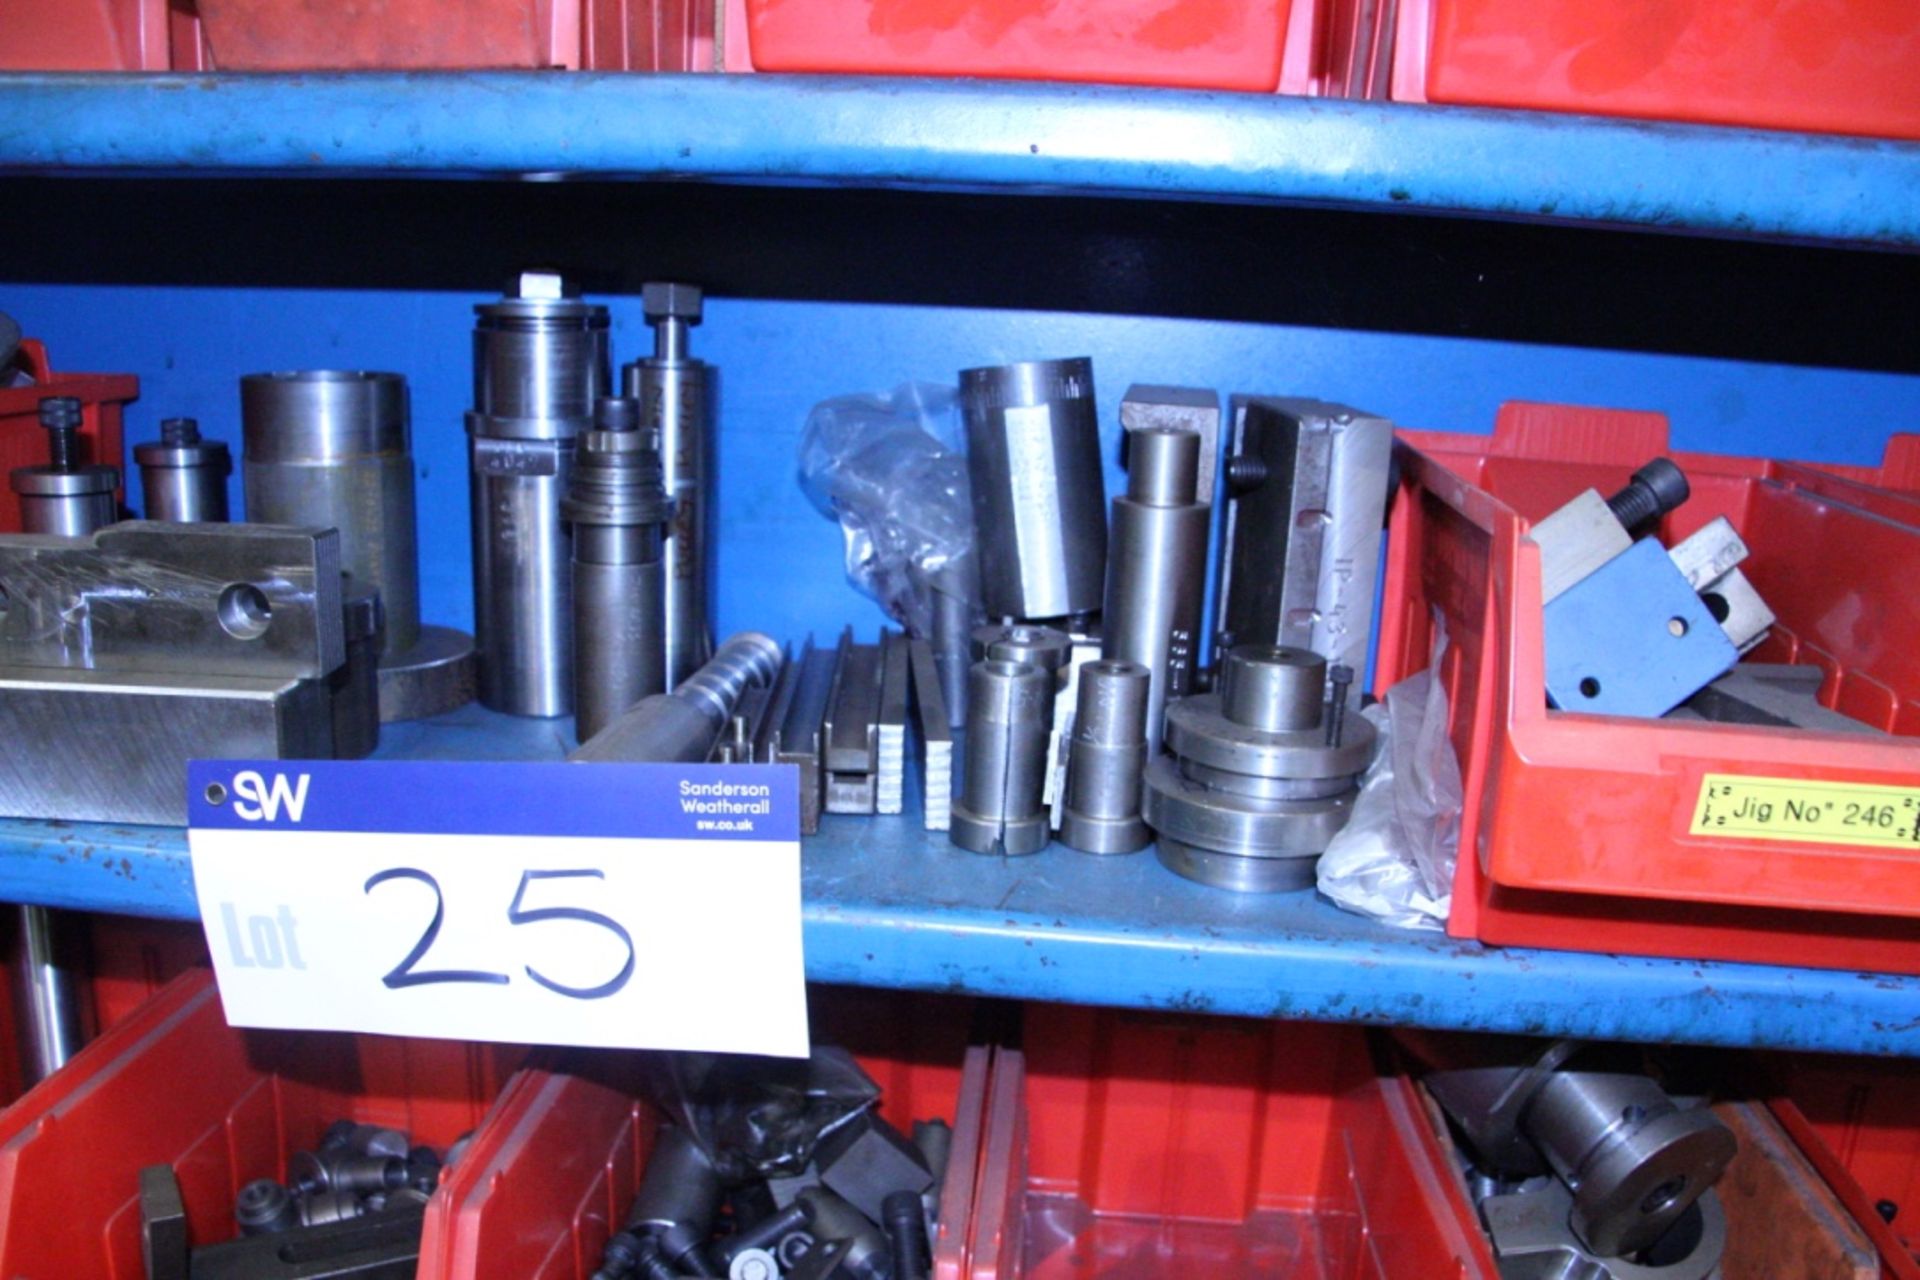 Multi-Tier Wall Rack, with contents of tooling and tooling set out on floor underneath - Image 11 of 16